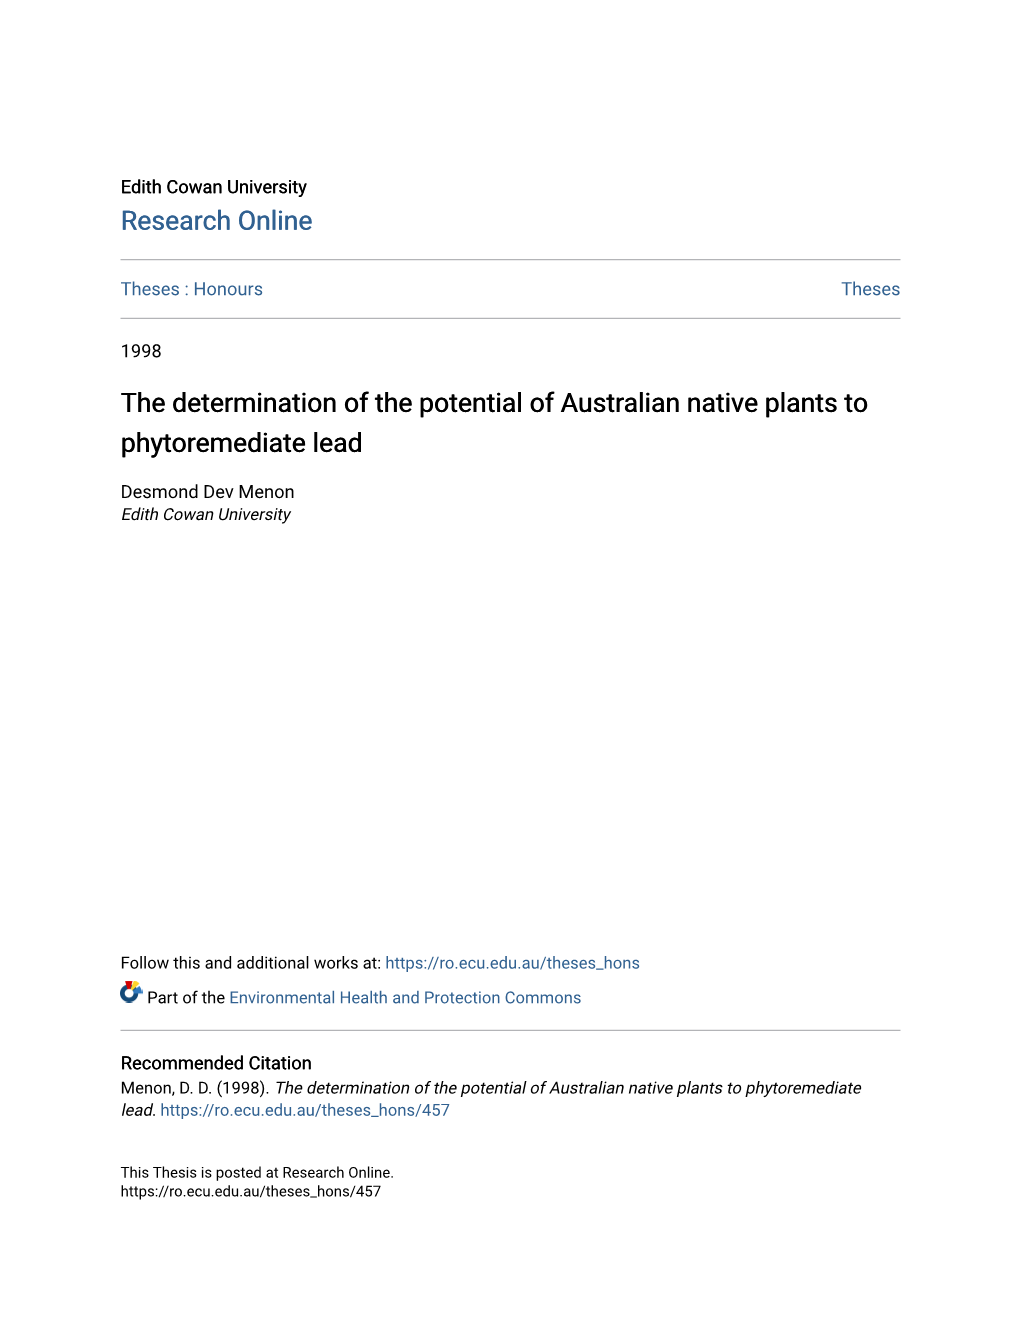 The Determination of the Potential of Australian Native Plants to Phytoremediate Lead